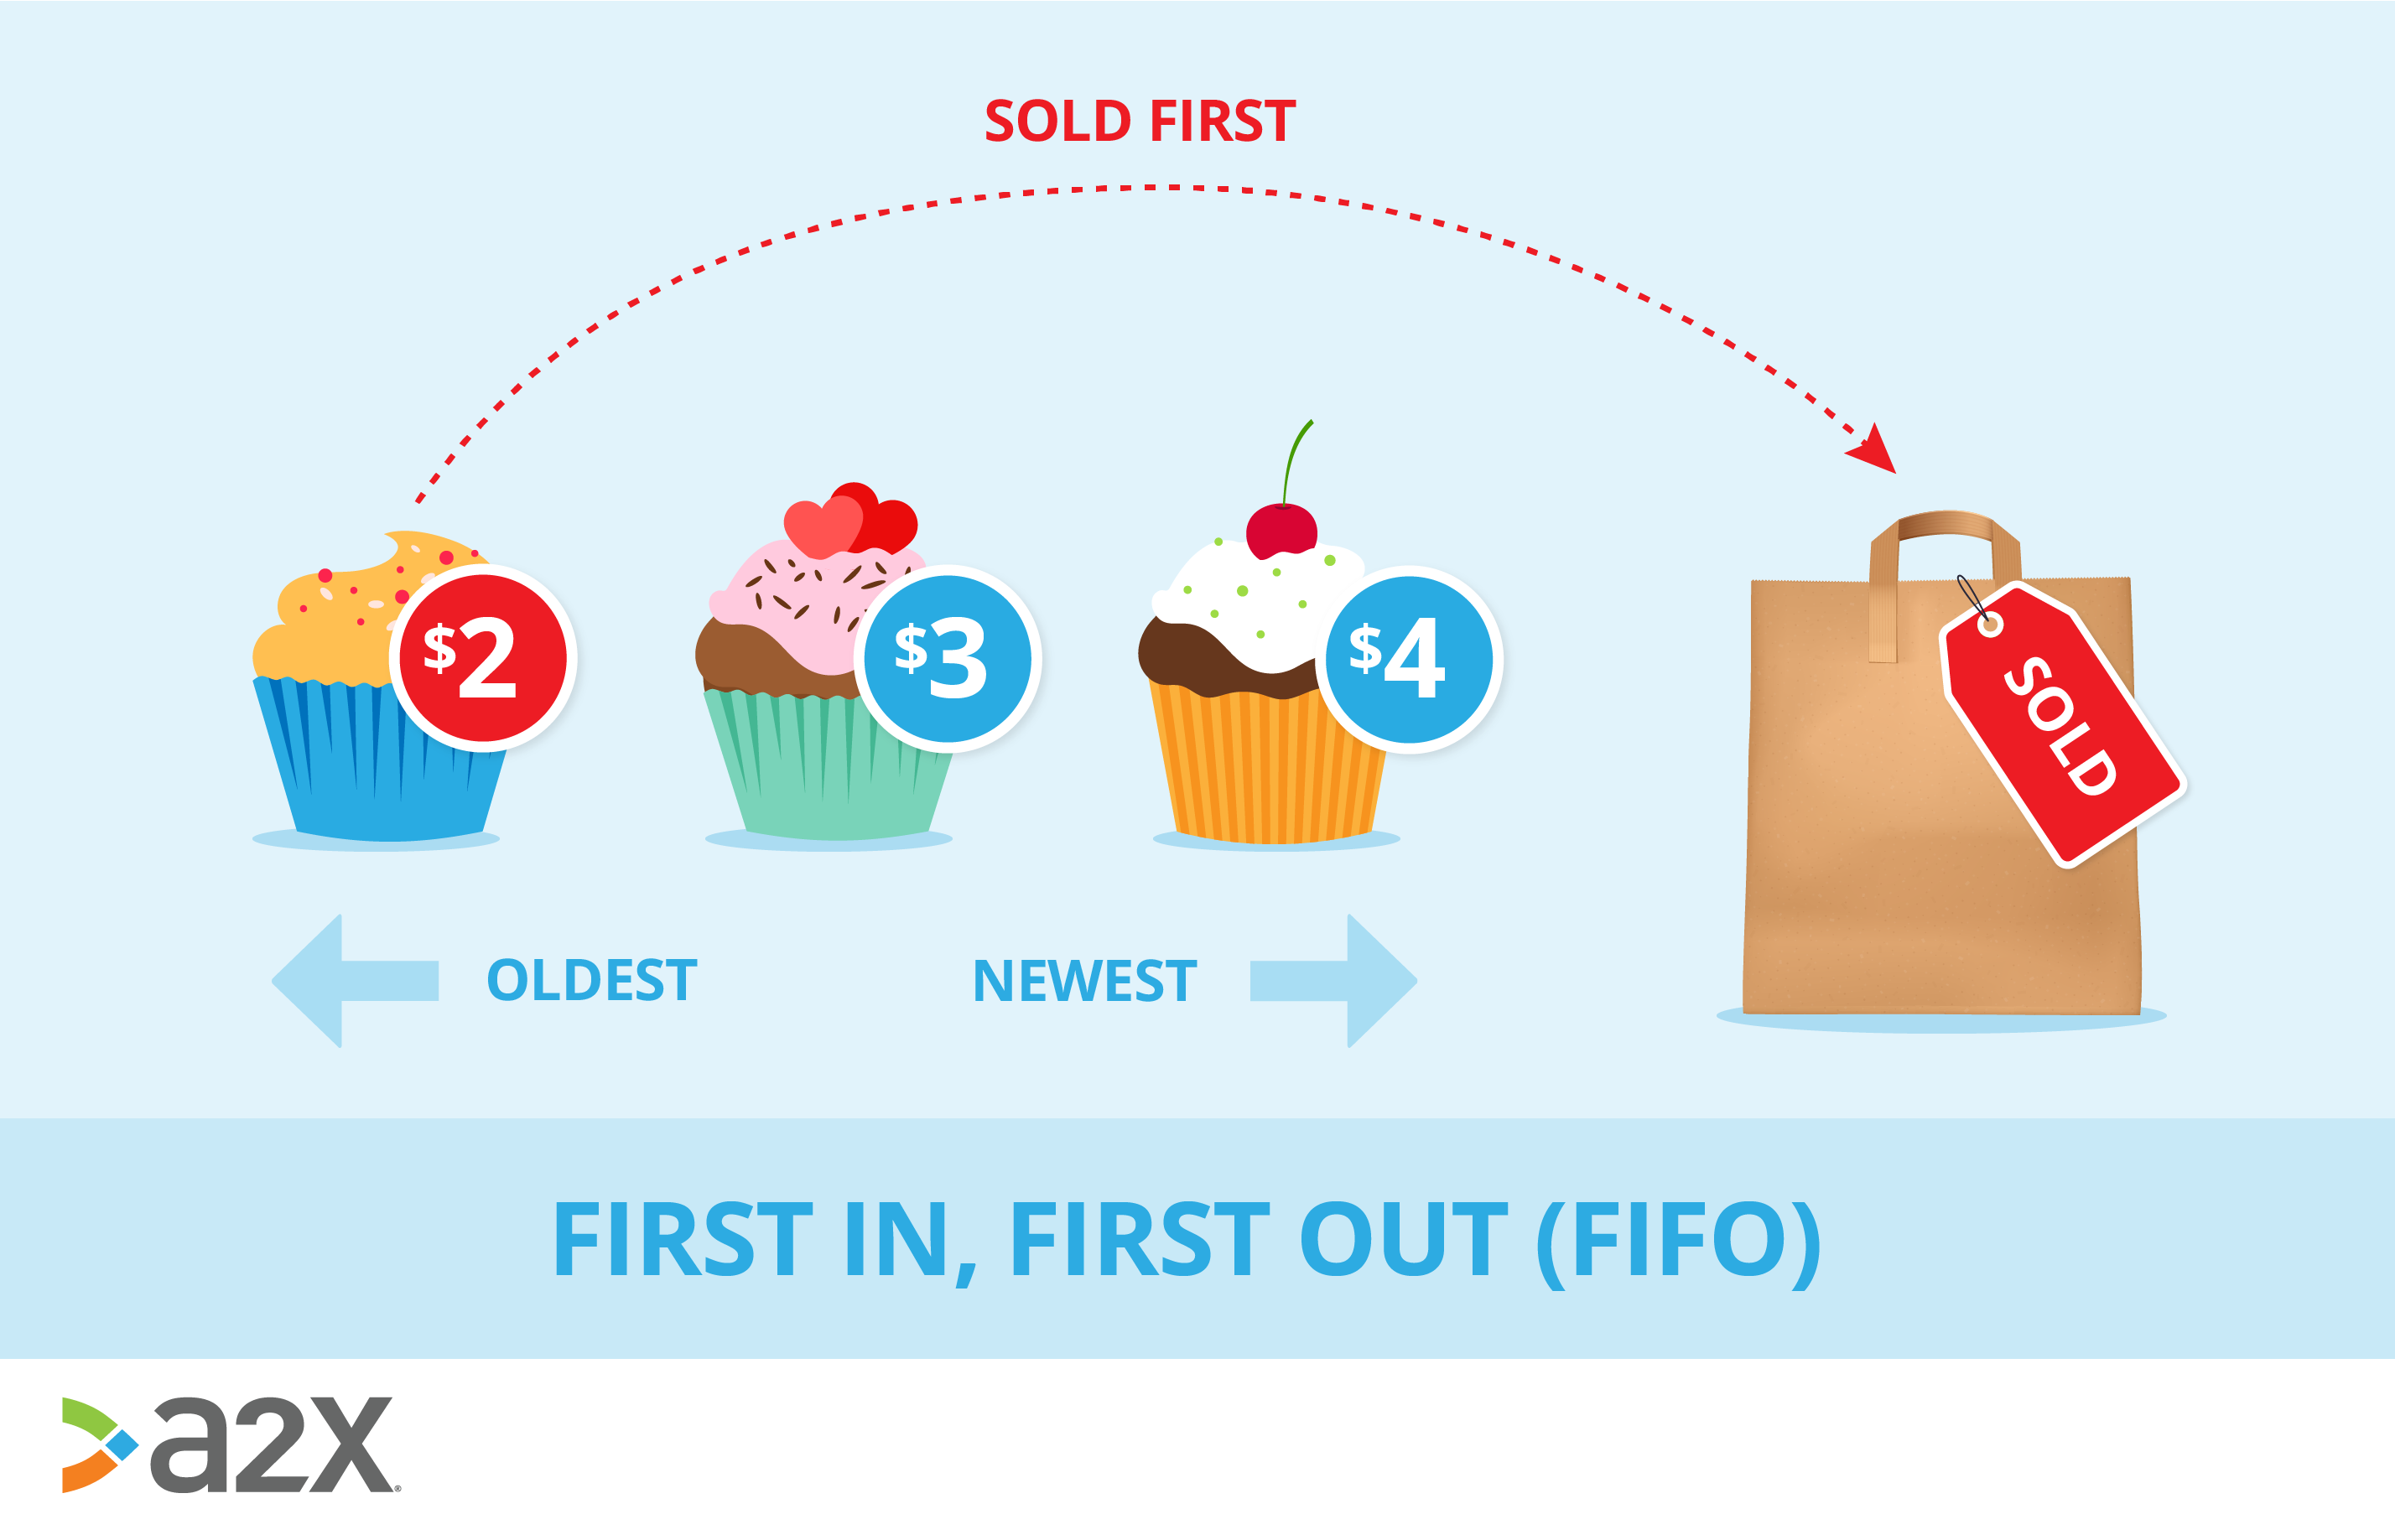 a graphic demonstrating FIFO: that the oldest item your purchased is the first one you sell